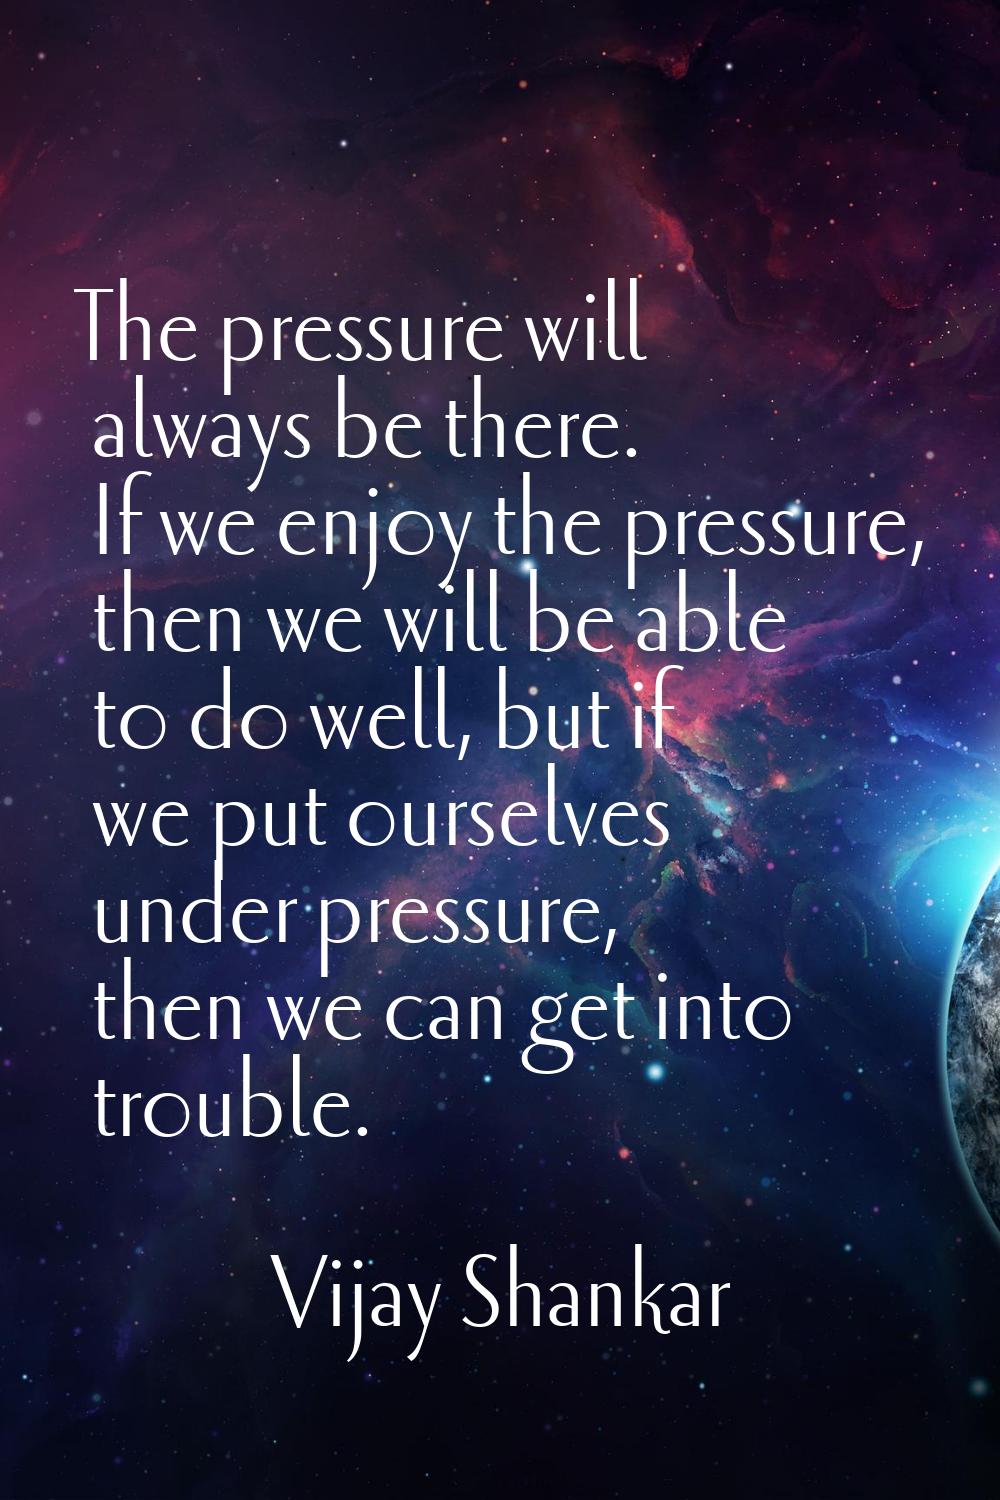 The pressure will always be there. If we enjoy the pressure, then we will be able to do well, but i